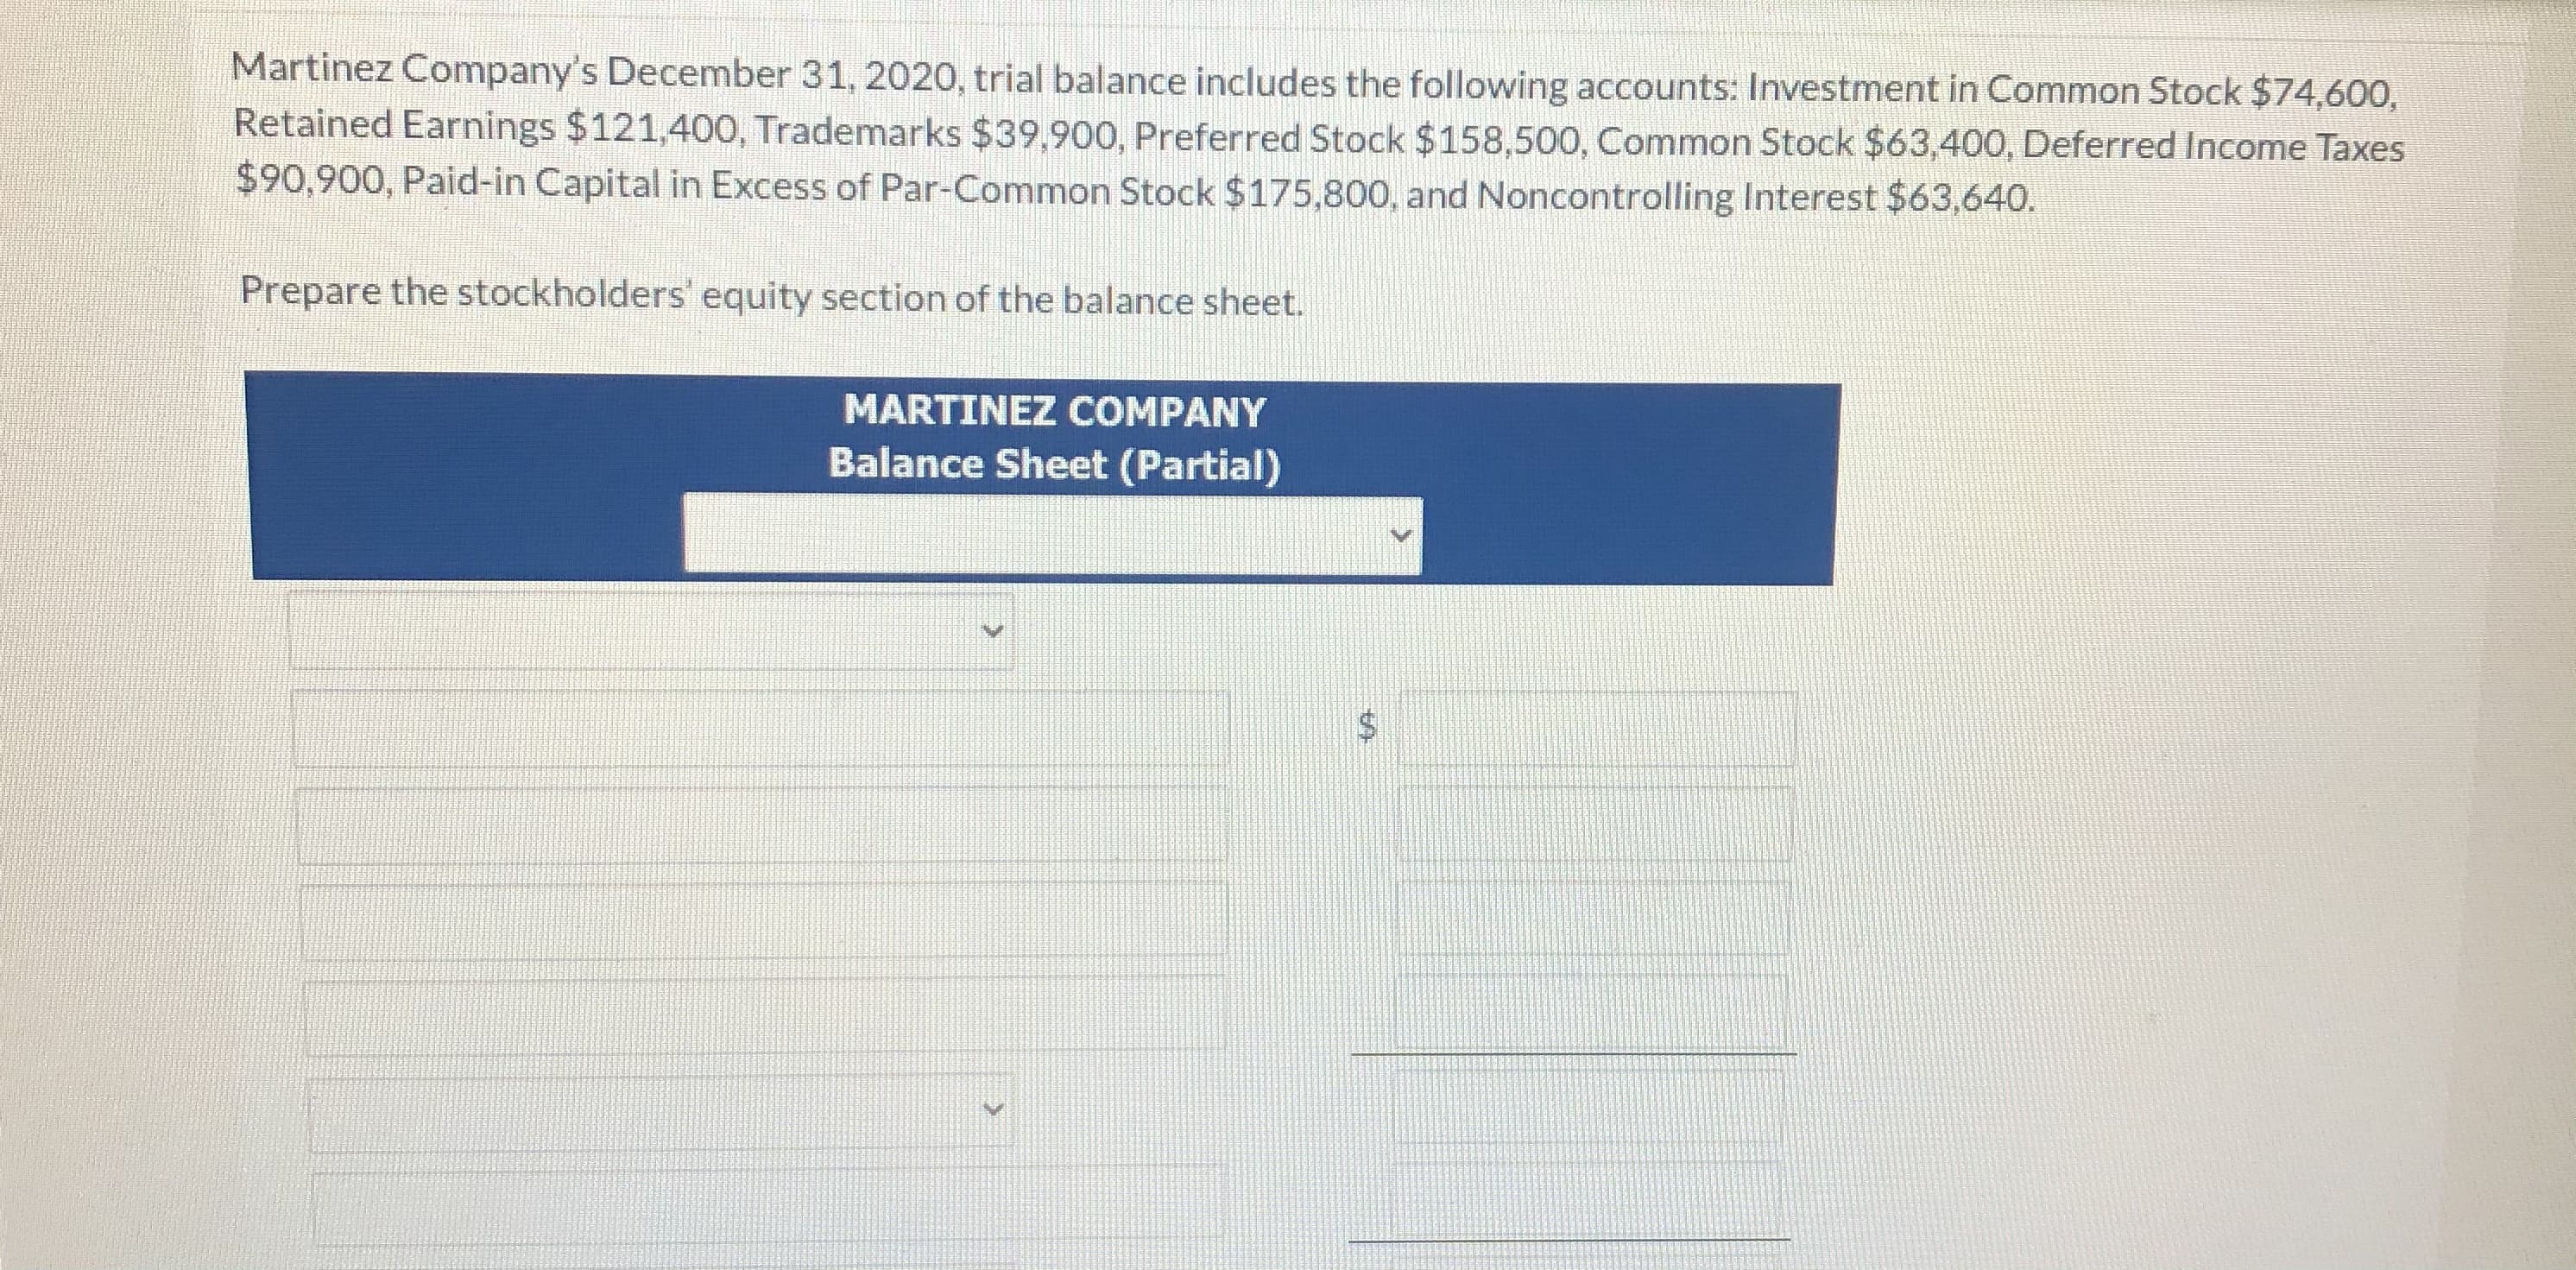 Martinez Company's December 31, 2020, trial balance includes the following accounts: Investment in Common Stock $74,600,
Retained Earnings $121,40O, Trademarks $39,900, Preferred Stock $158,500, Common Stock $63,400, Deferred Income Taxes
$90,900, Paid-in Capital in Excess of Par-Common Stock $175,800, and Noncontrolling Interest $63,640.
Prepare the stockholders' equity section of the balance sheet.
